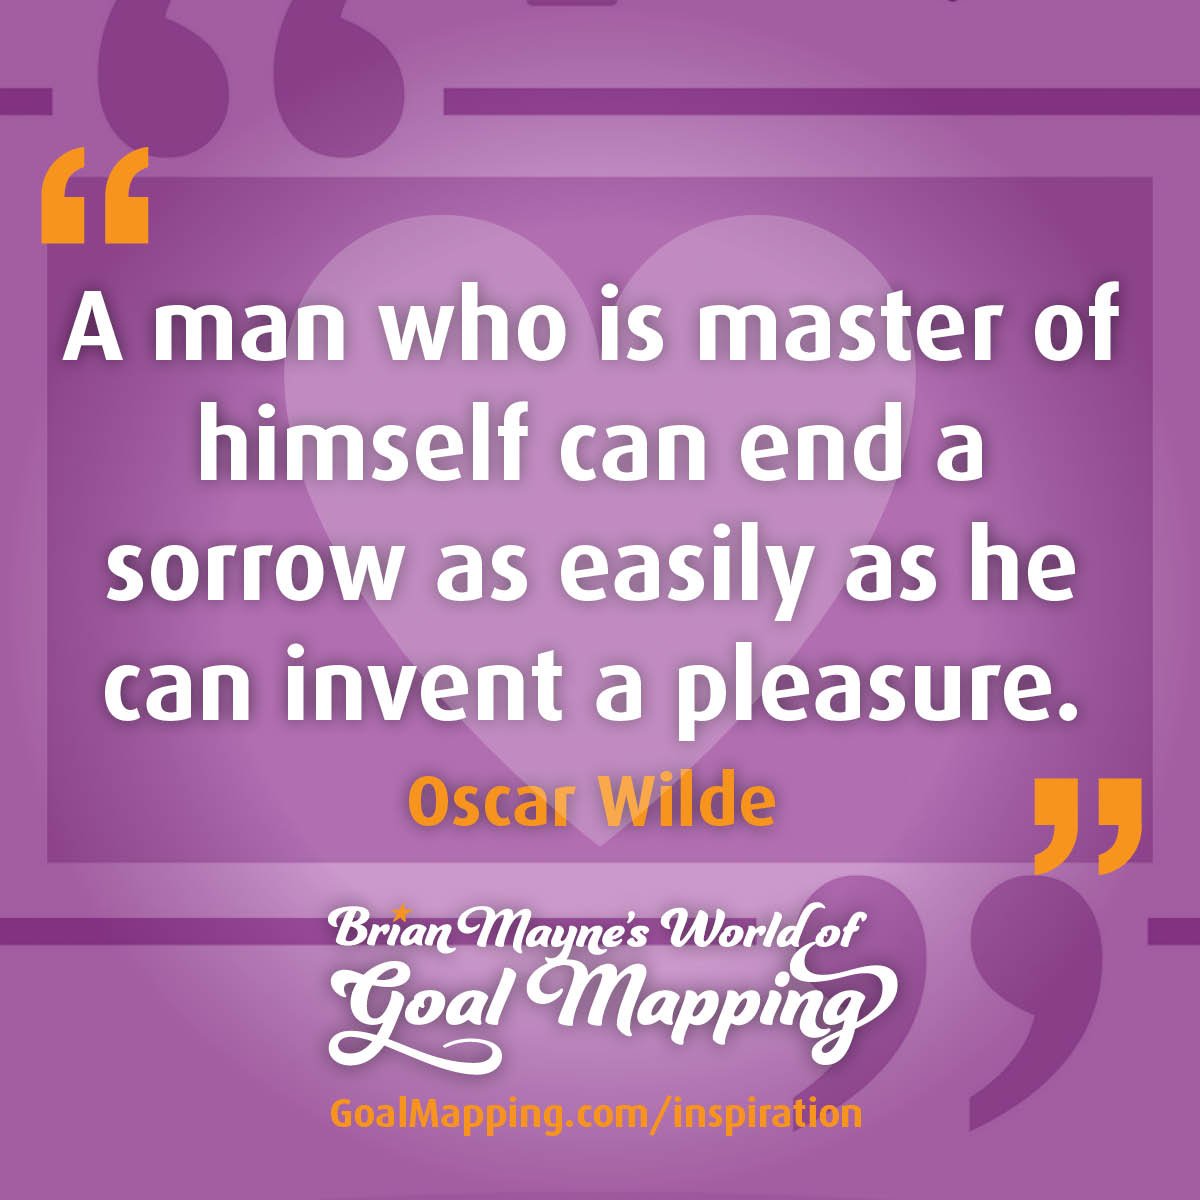 "A man who is master of himself can end a sorrow as easily as he can invent a pleasure." Oscar Wilde